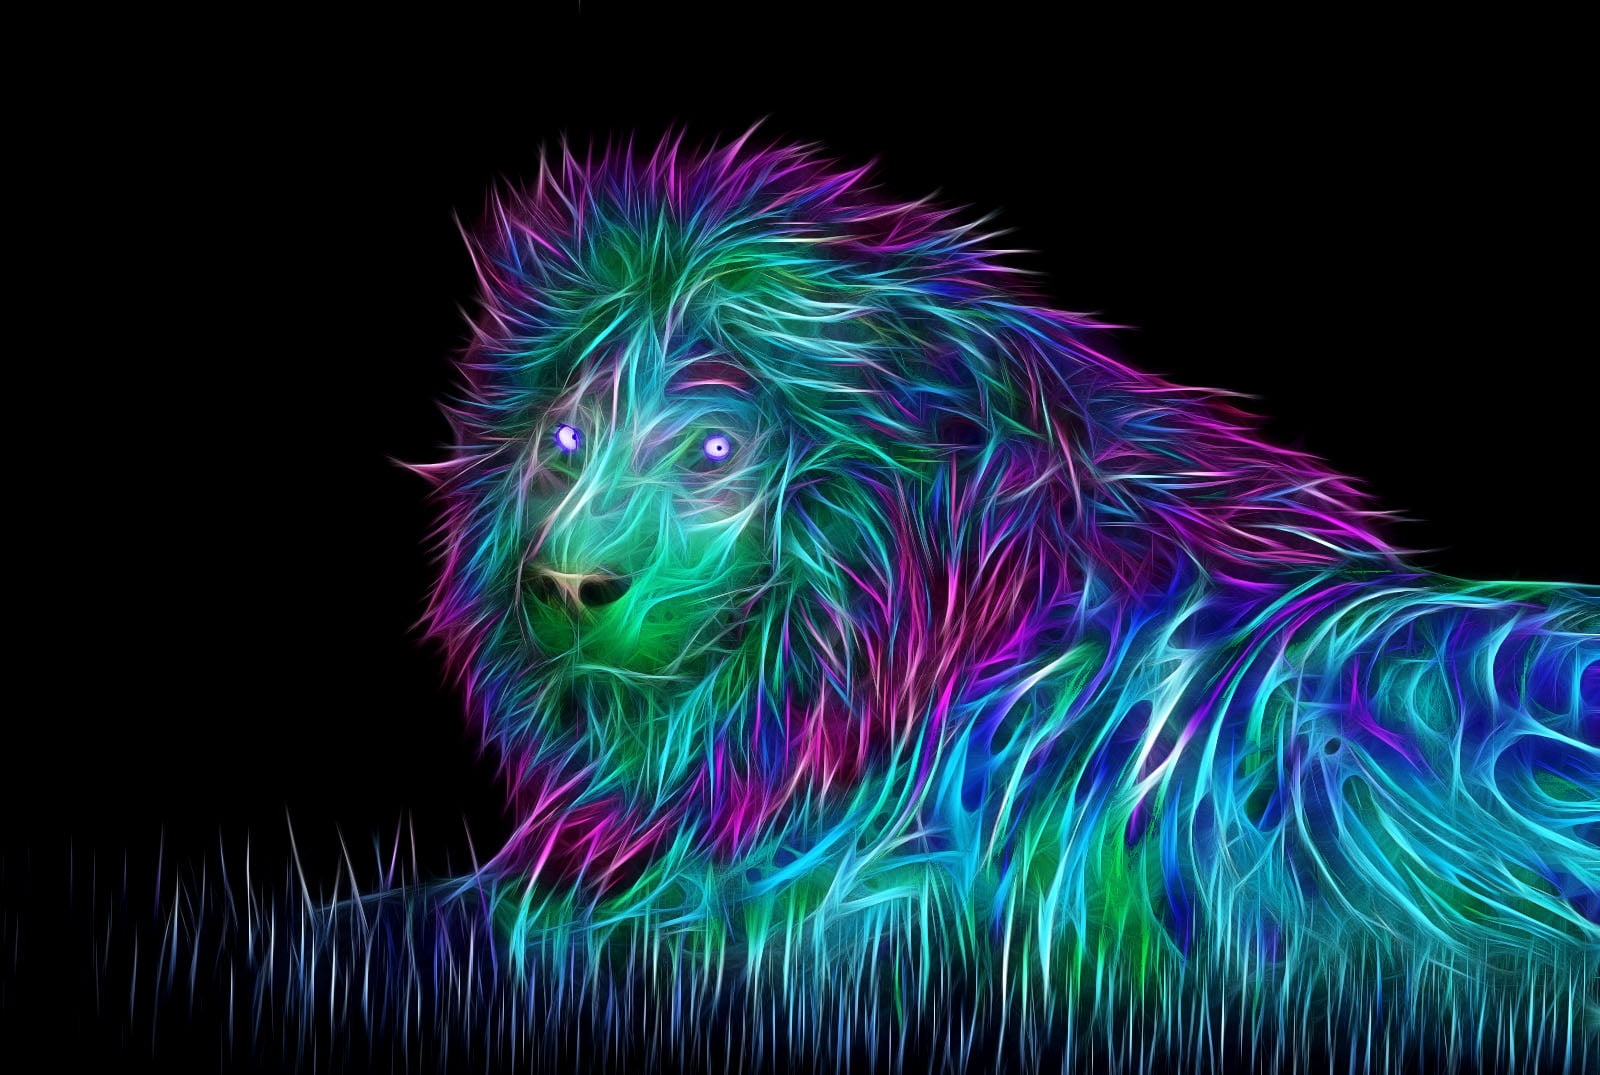 pink, blue, and green lion illustration, abstract, 3d, art, animal